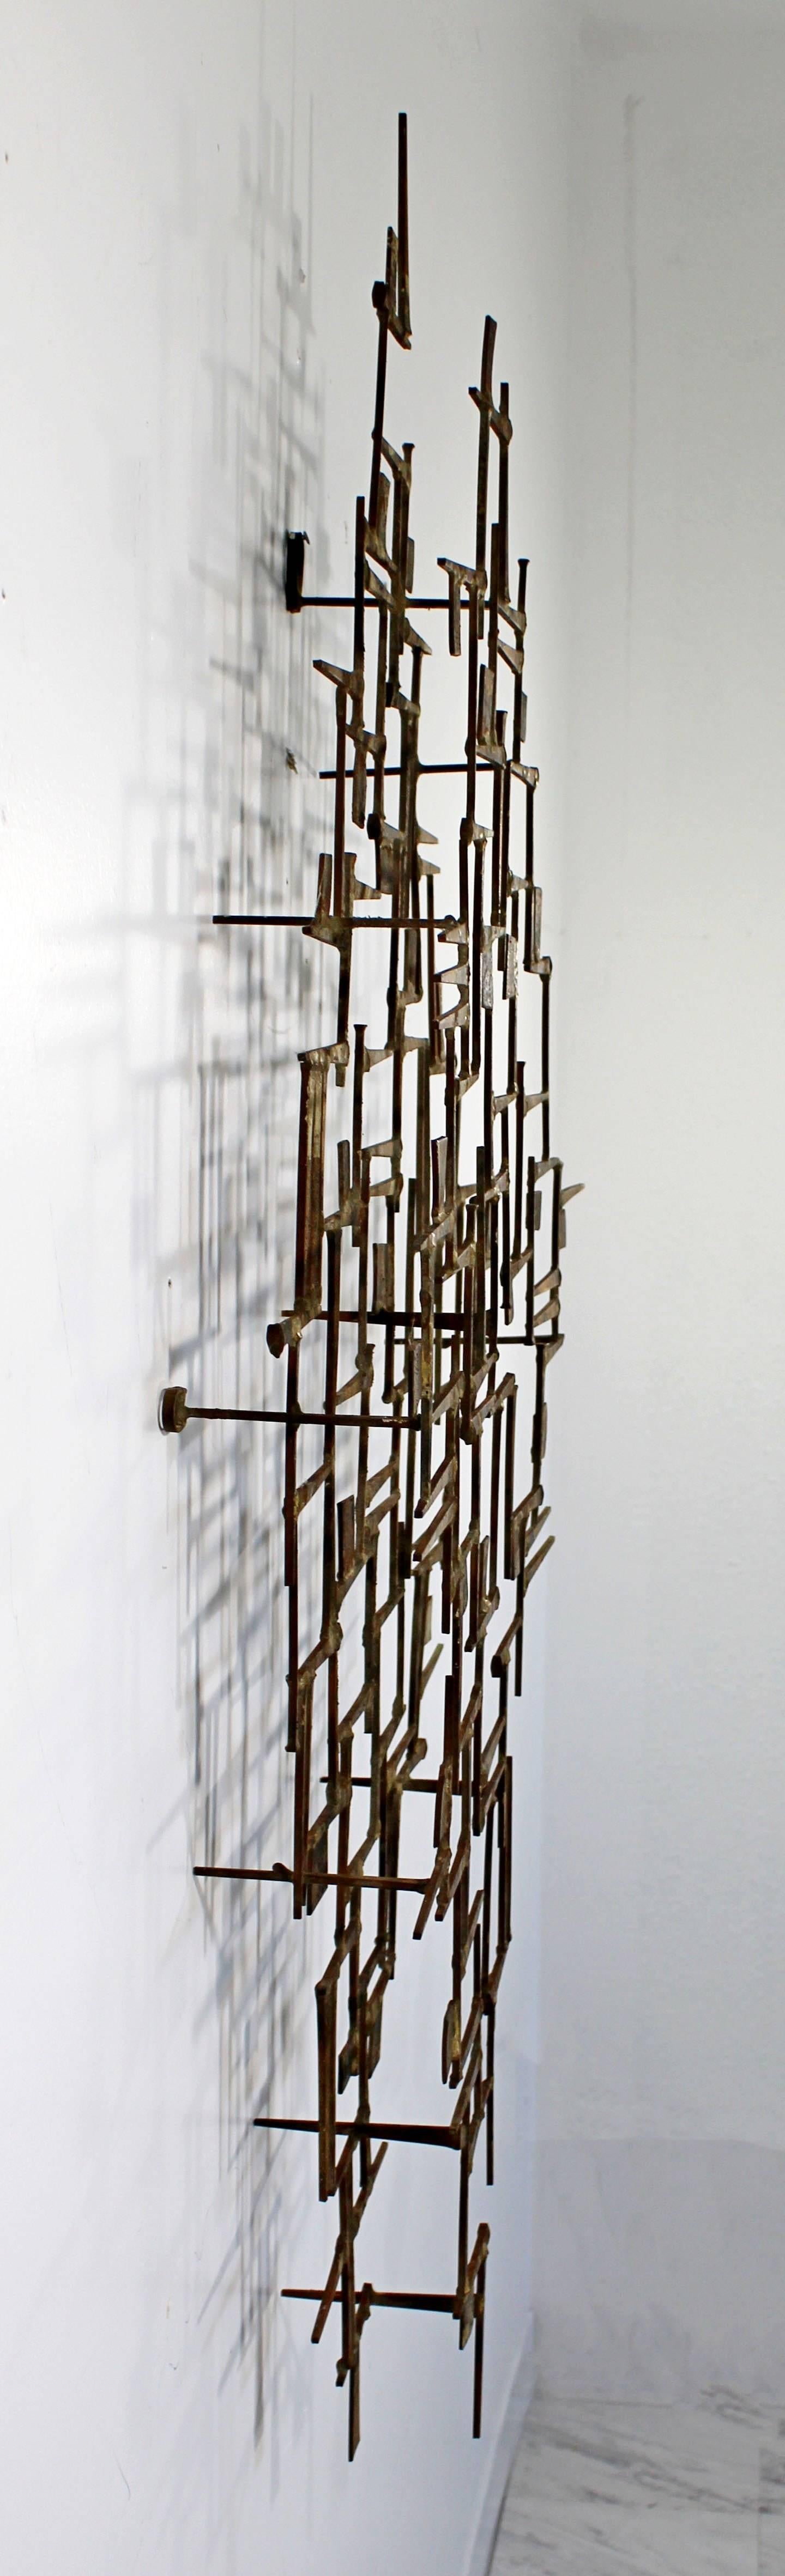 For your consideration is a Brutalist wall sculpture by William Bowie, signed. The spikes of metal are gilded and silvered, and welded together in an intricate, abstract design. Piece can be hung vertically or horizontally. In excellent condition.